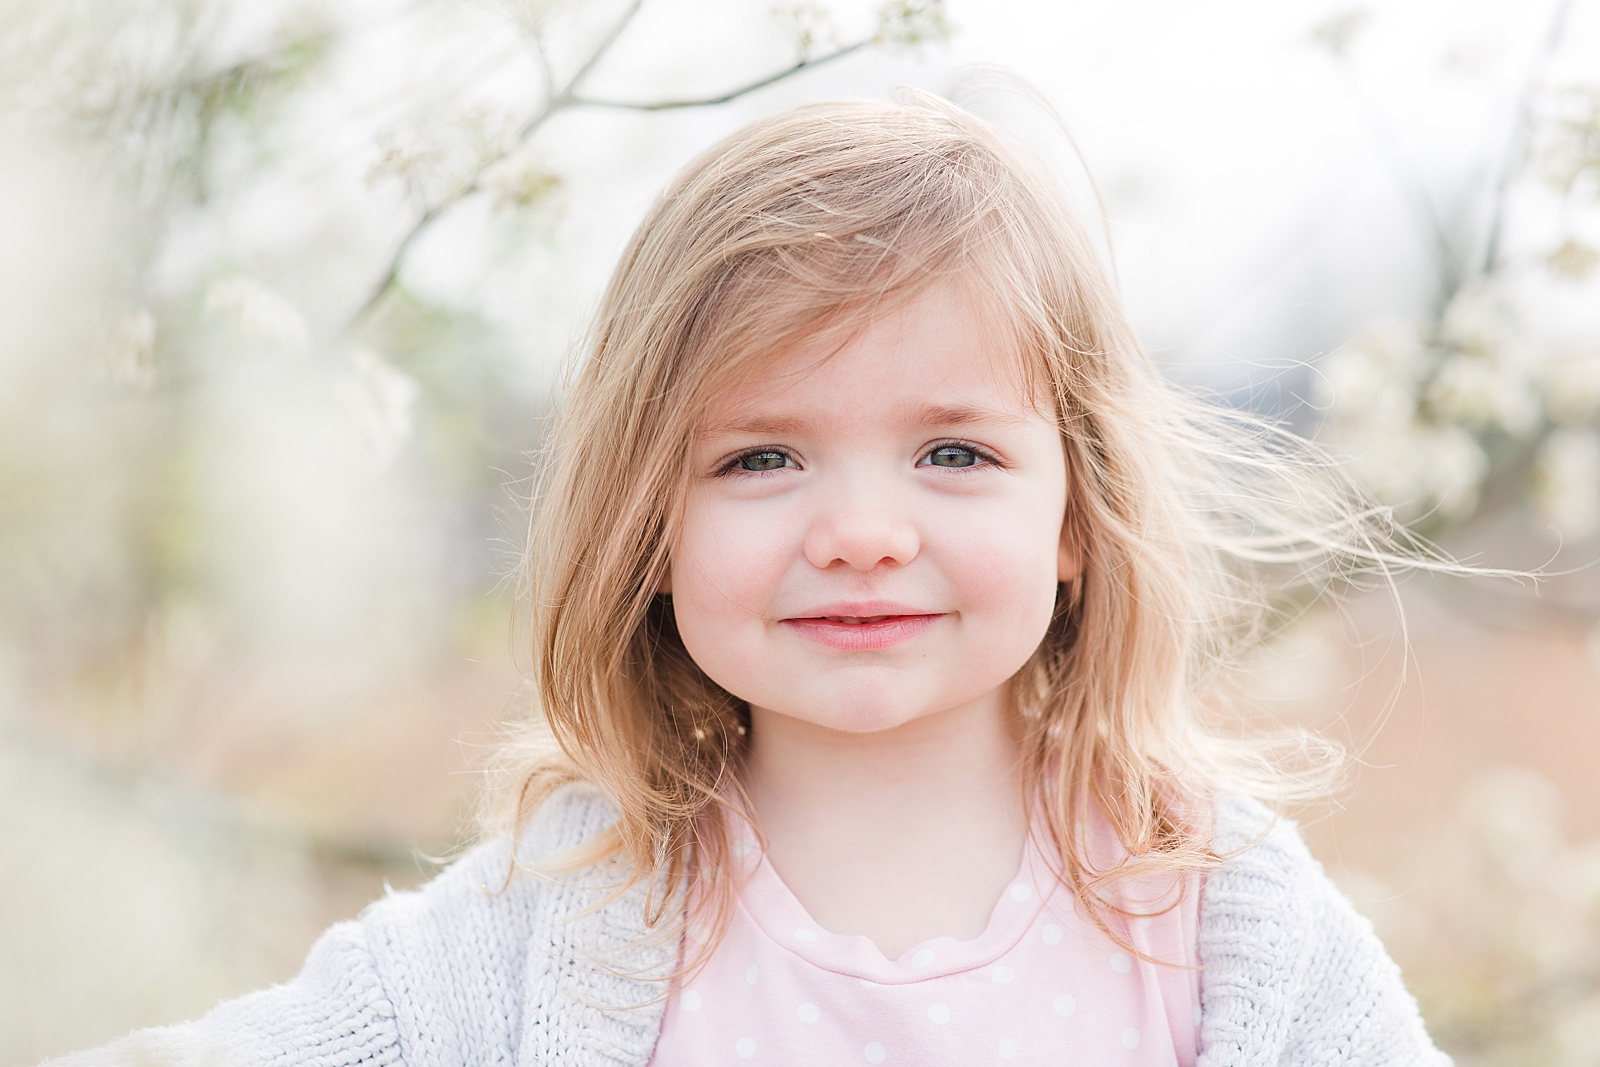 Asheville Photographer's Family Little girl grinning at camera with hair blowing in wind Photo